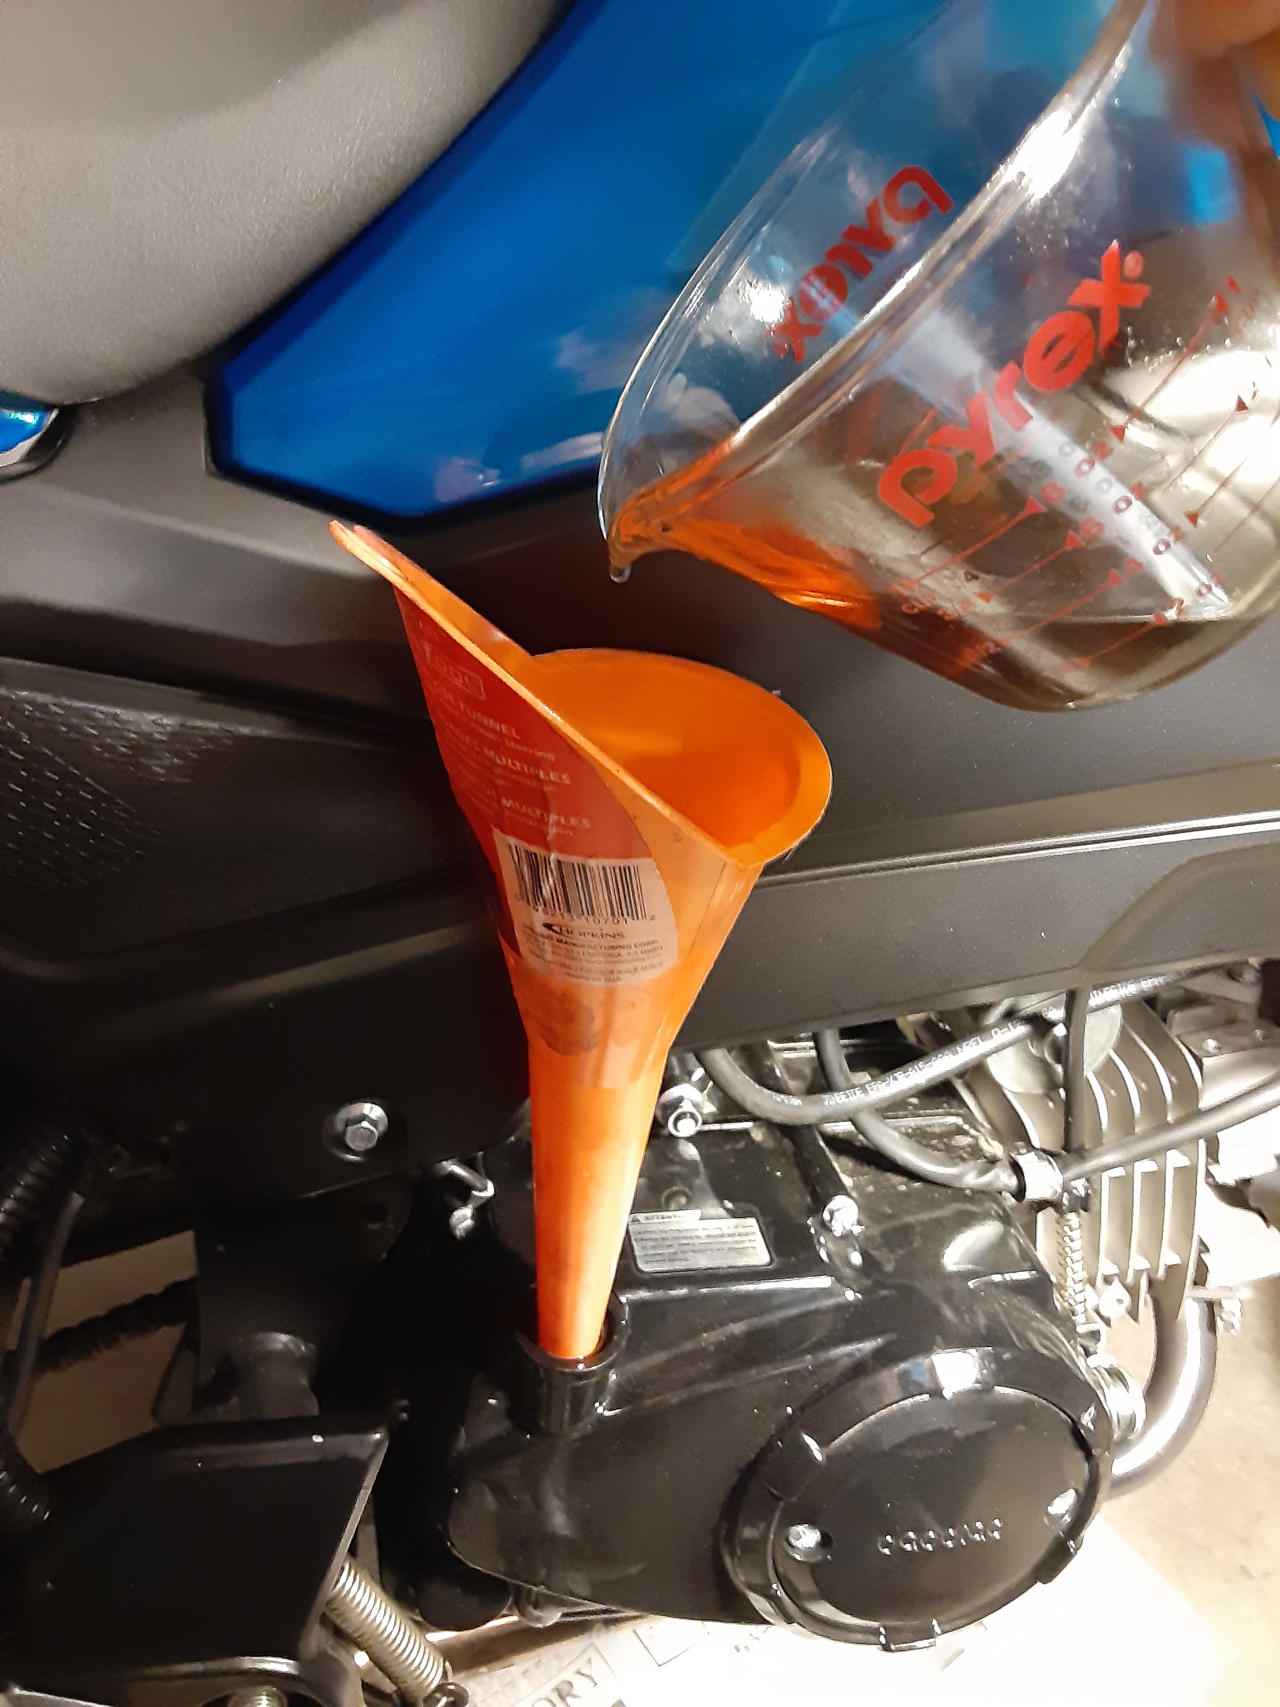 Filling up with motorcycle engine oil.